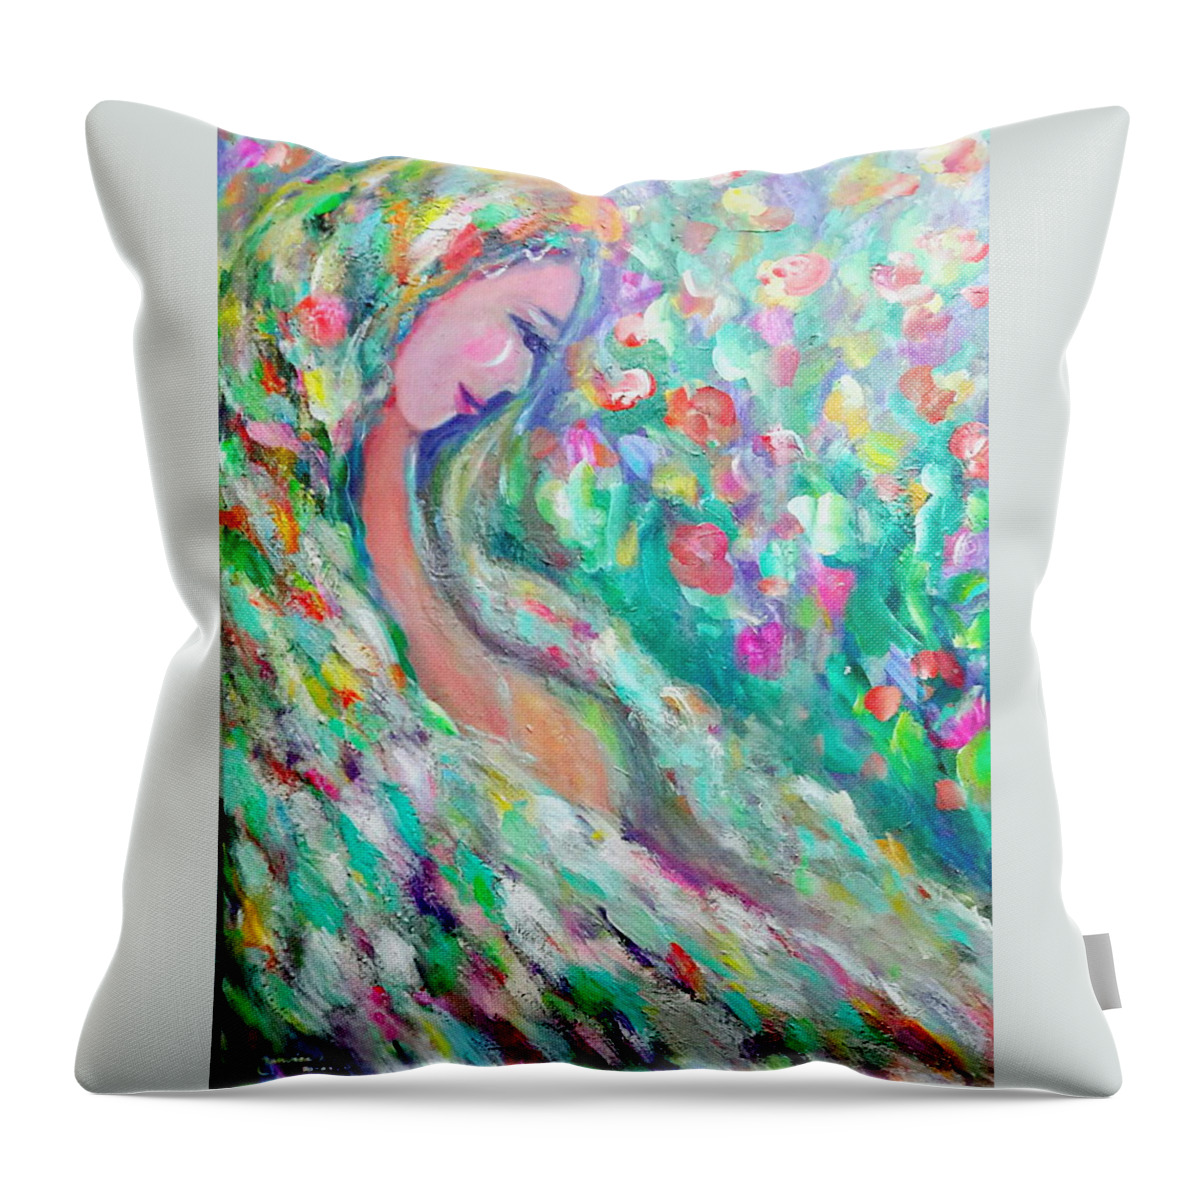  Throw Pillow featuring the painting Lovely angel by Wanvisa Klawklean